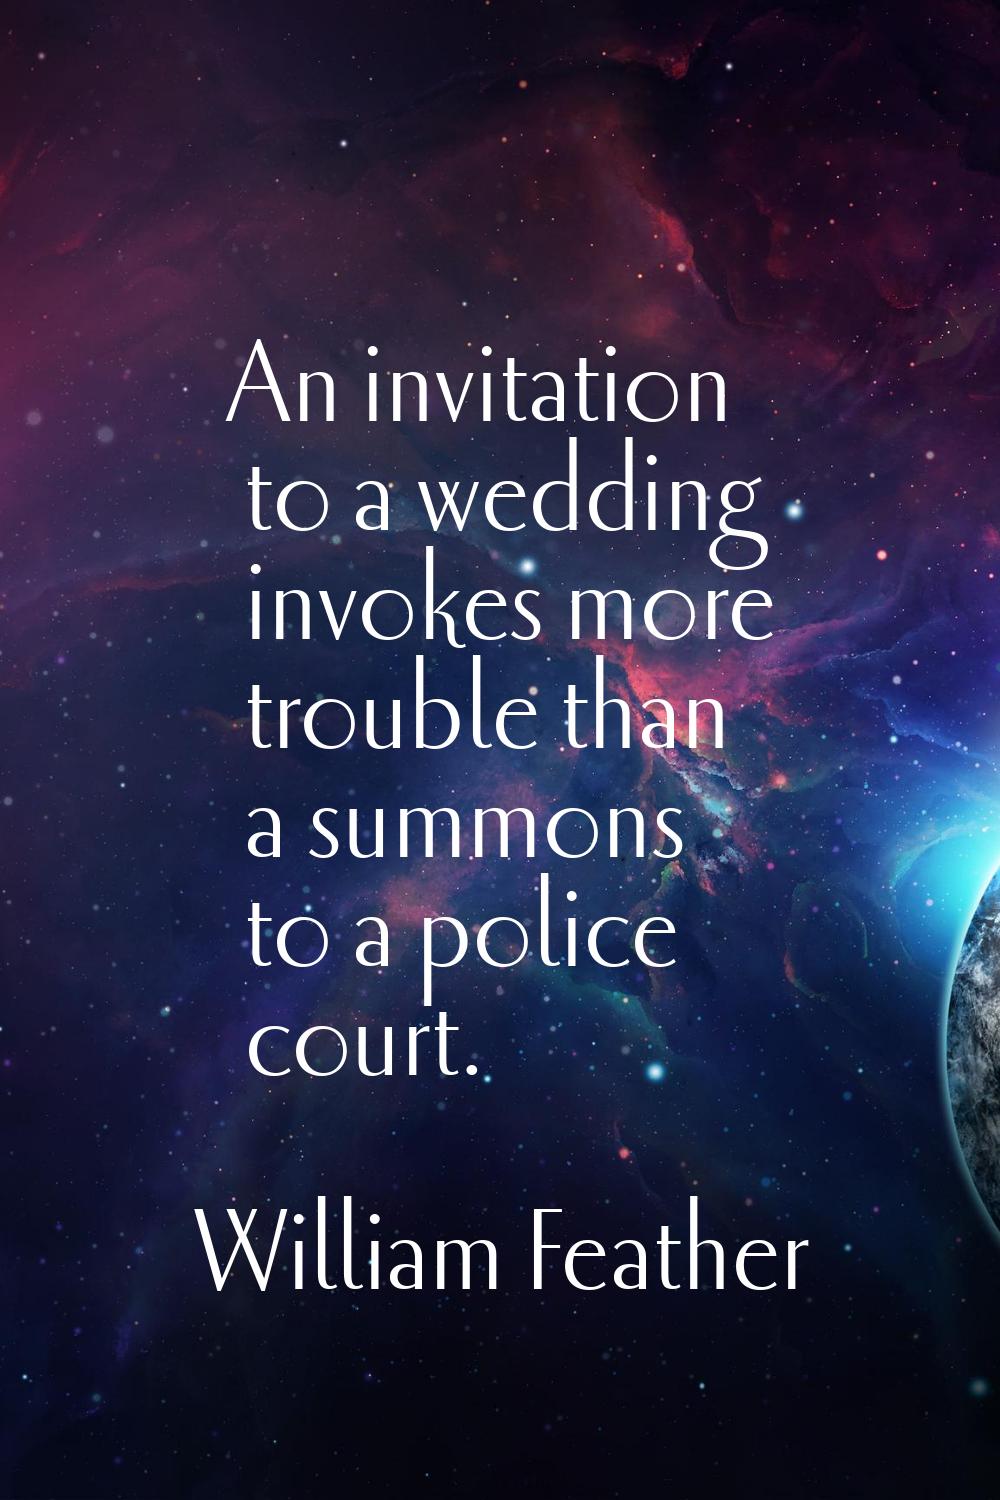 An invitation to a wedding invokes more trouble than a summons to a police court.